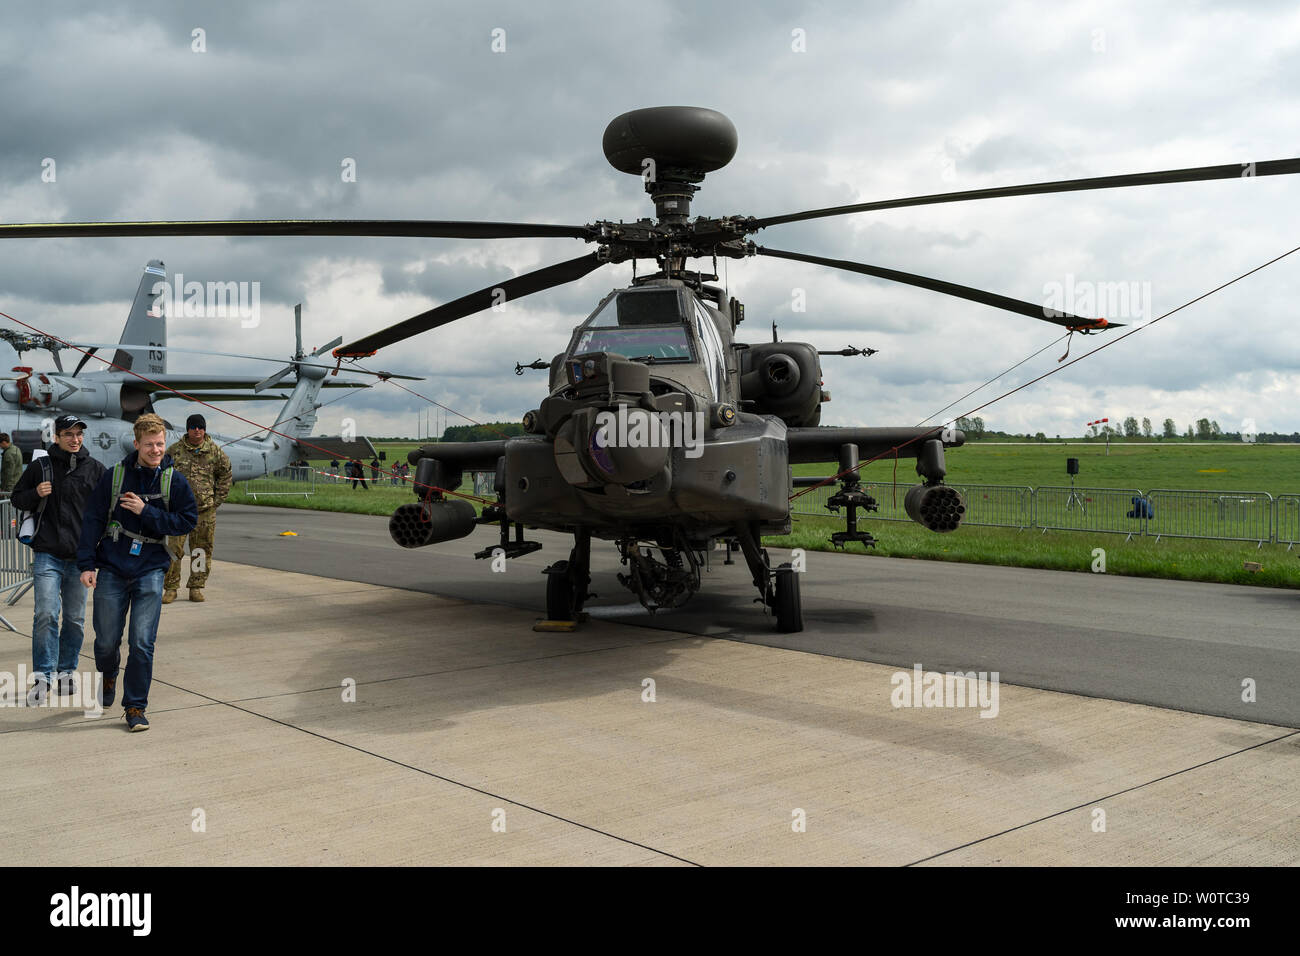 BERLIN, GERMANY - APRIL 26, 2018: Attack helicopter Boeing AH-64D Apache Longbow. US Army. Exhibition ILA Berlin Air Show 2018 Stock Photo